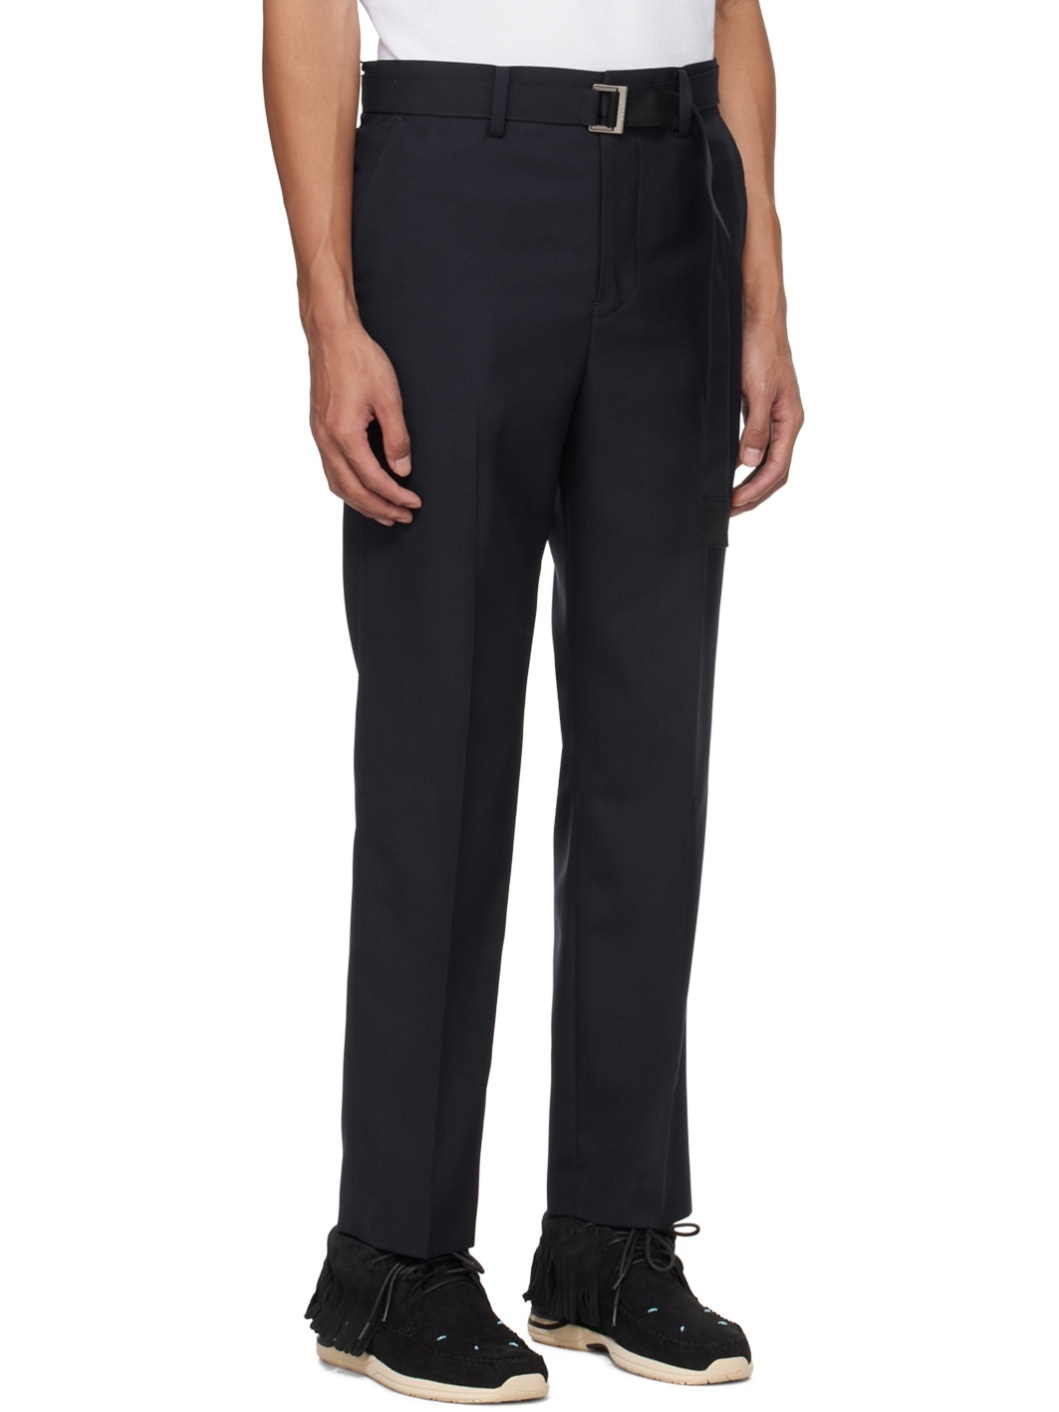 Navy Suiting Bonding Trousers - 2